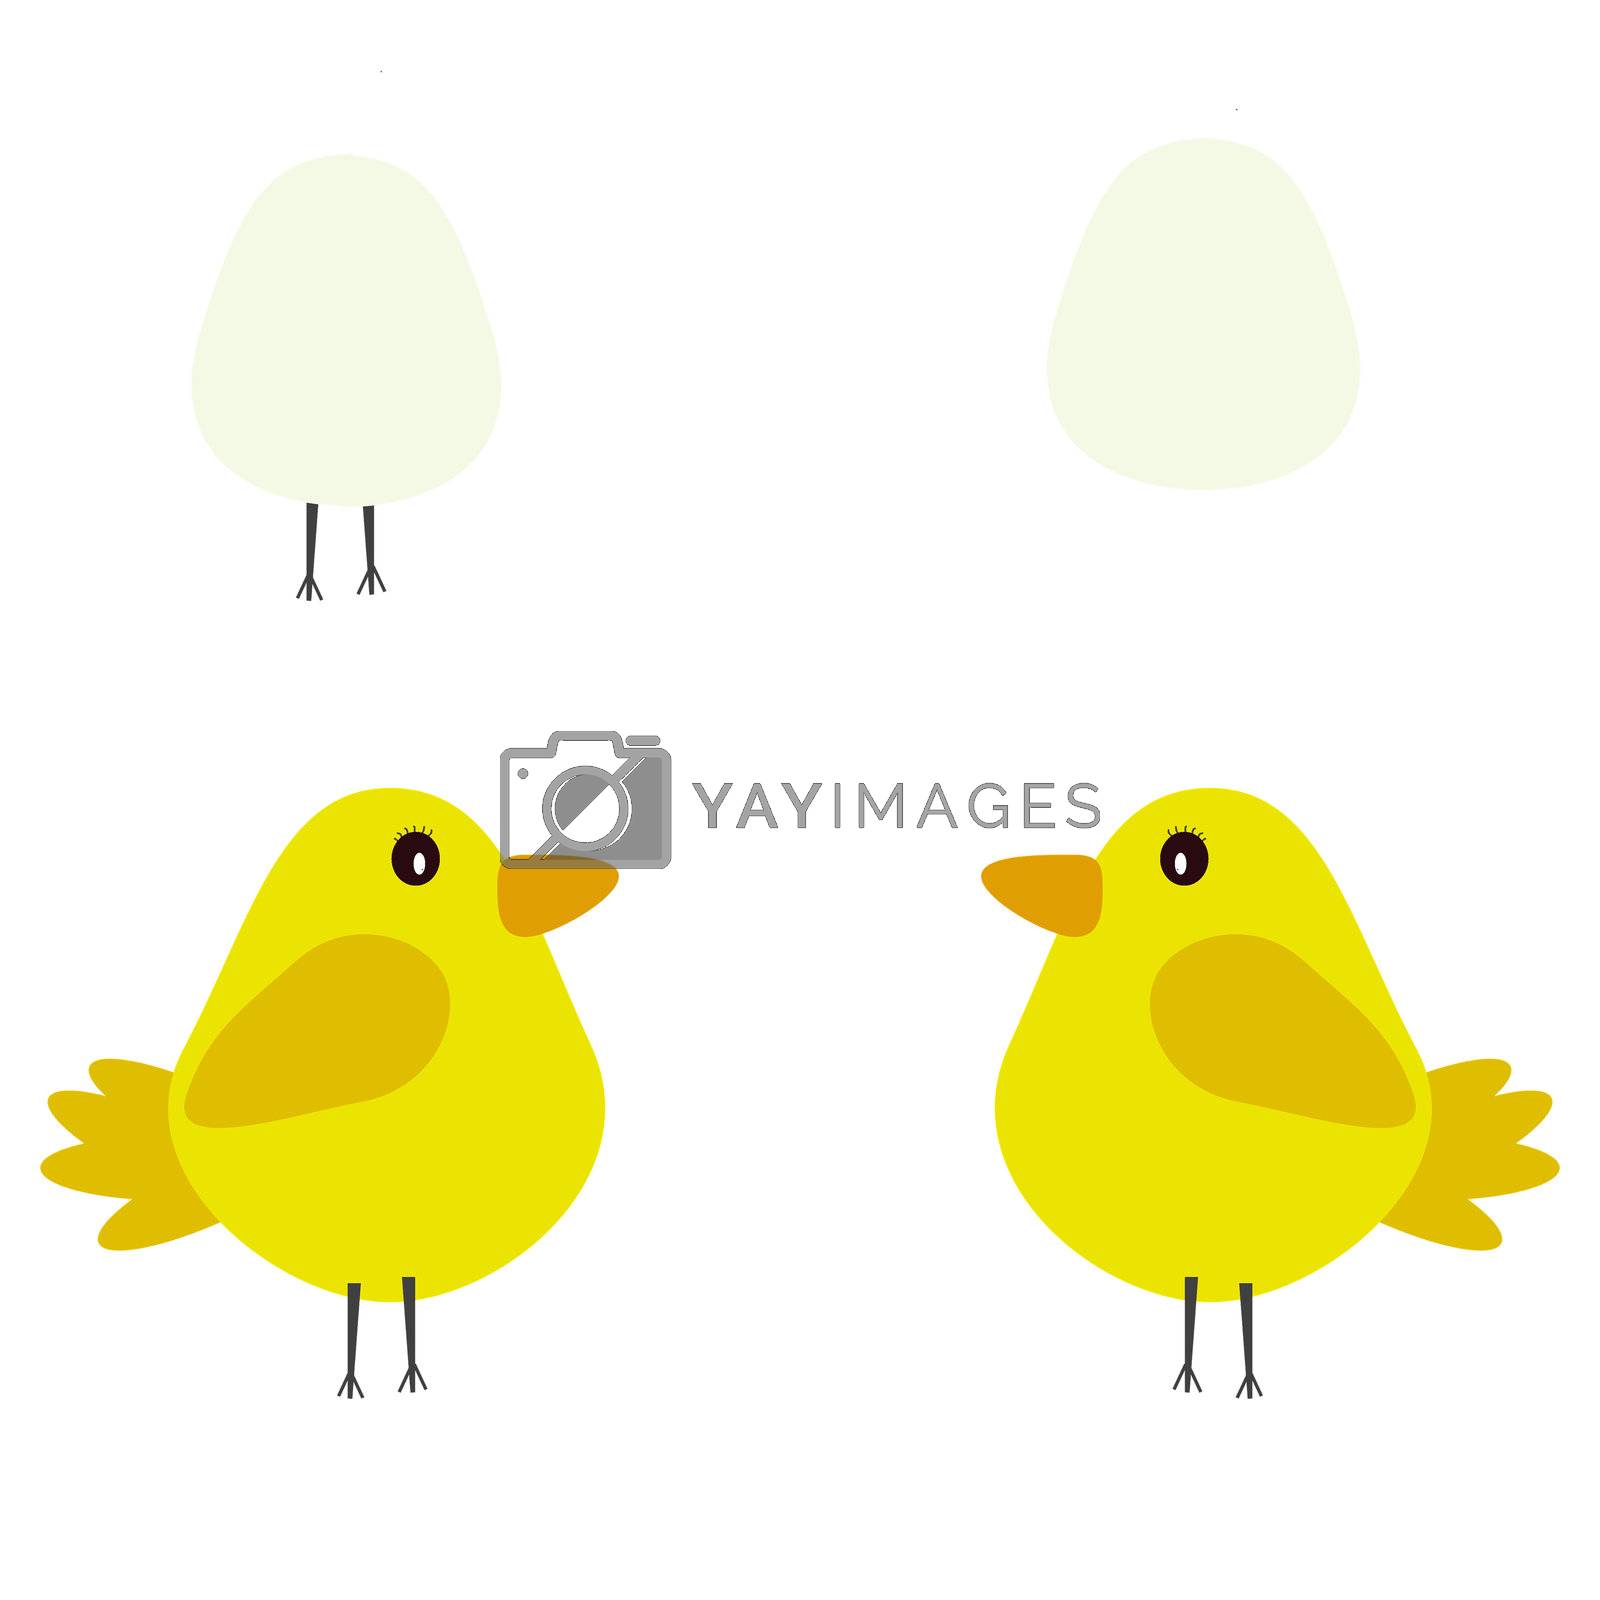 Royalty free image of easter chick illustration 6 by lizapixels